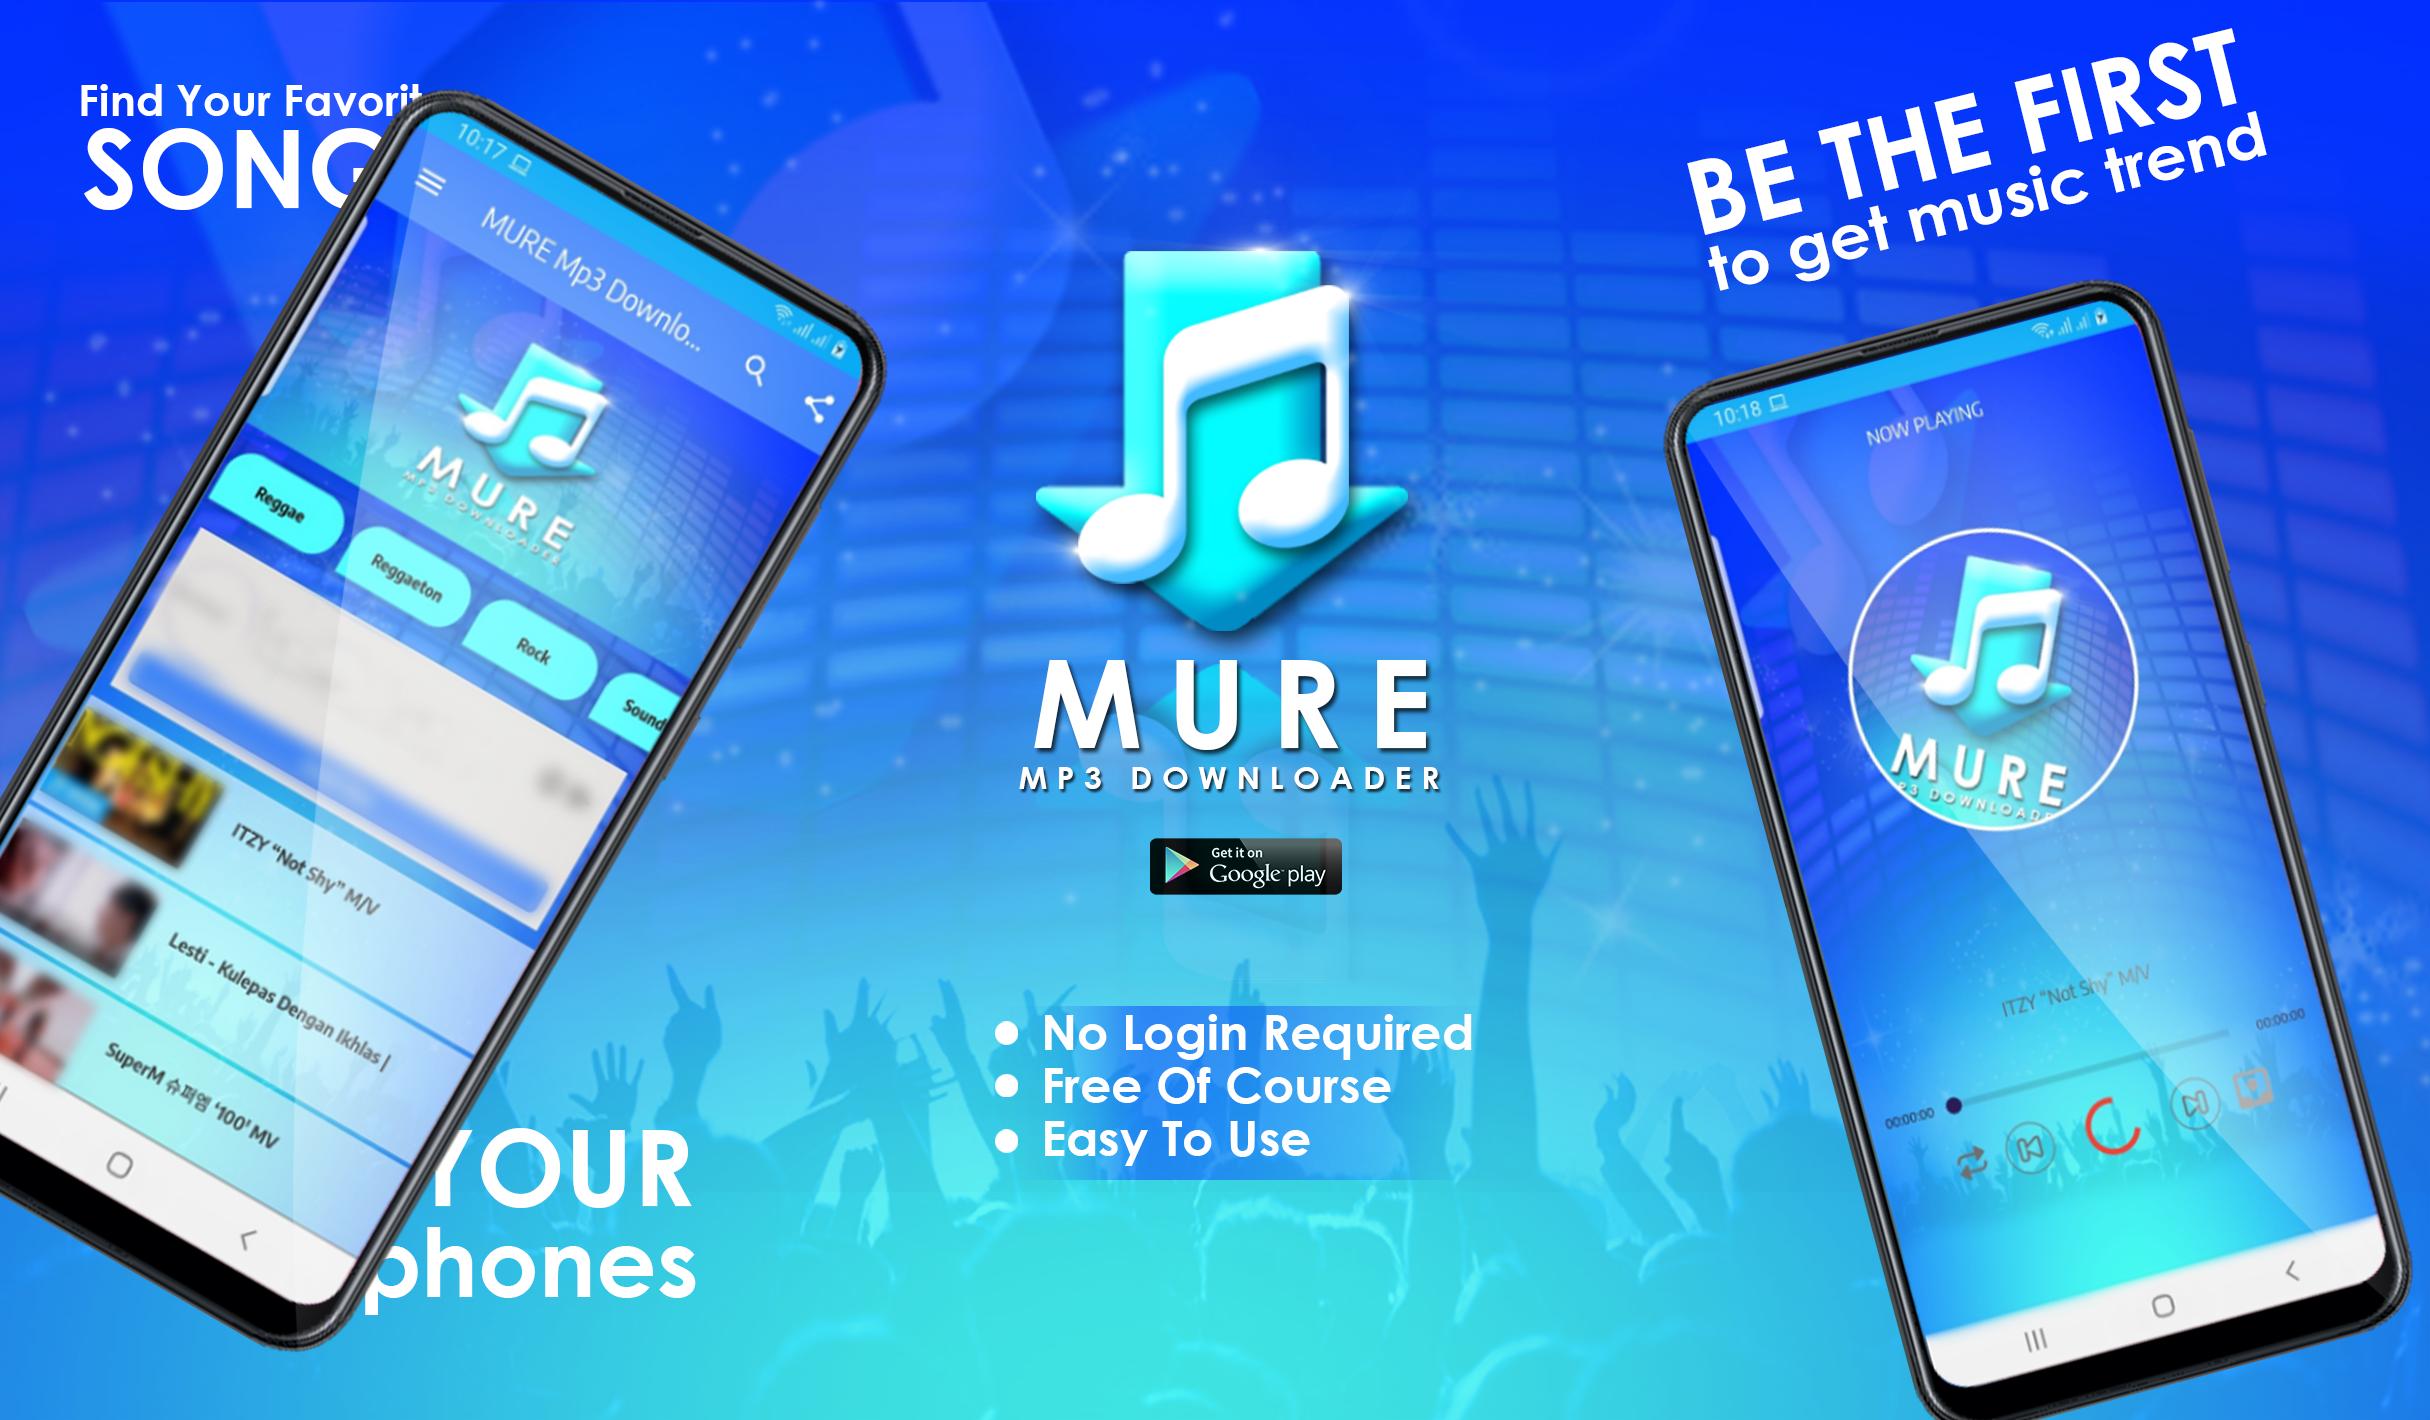 MURE Mp3 - Free Zing Mp3 Downloader for Android - APK Download